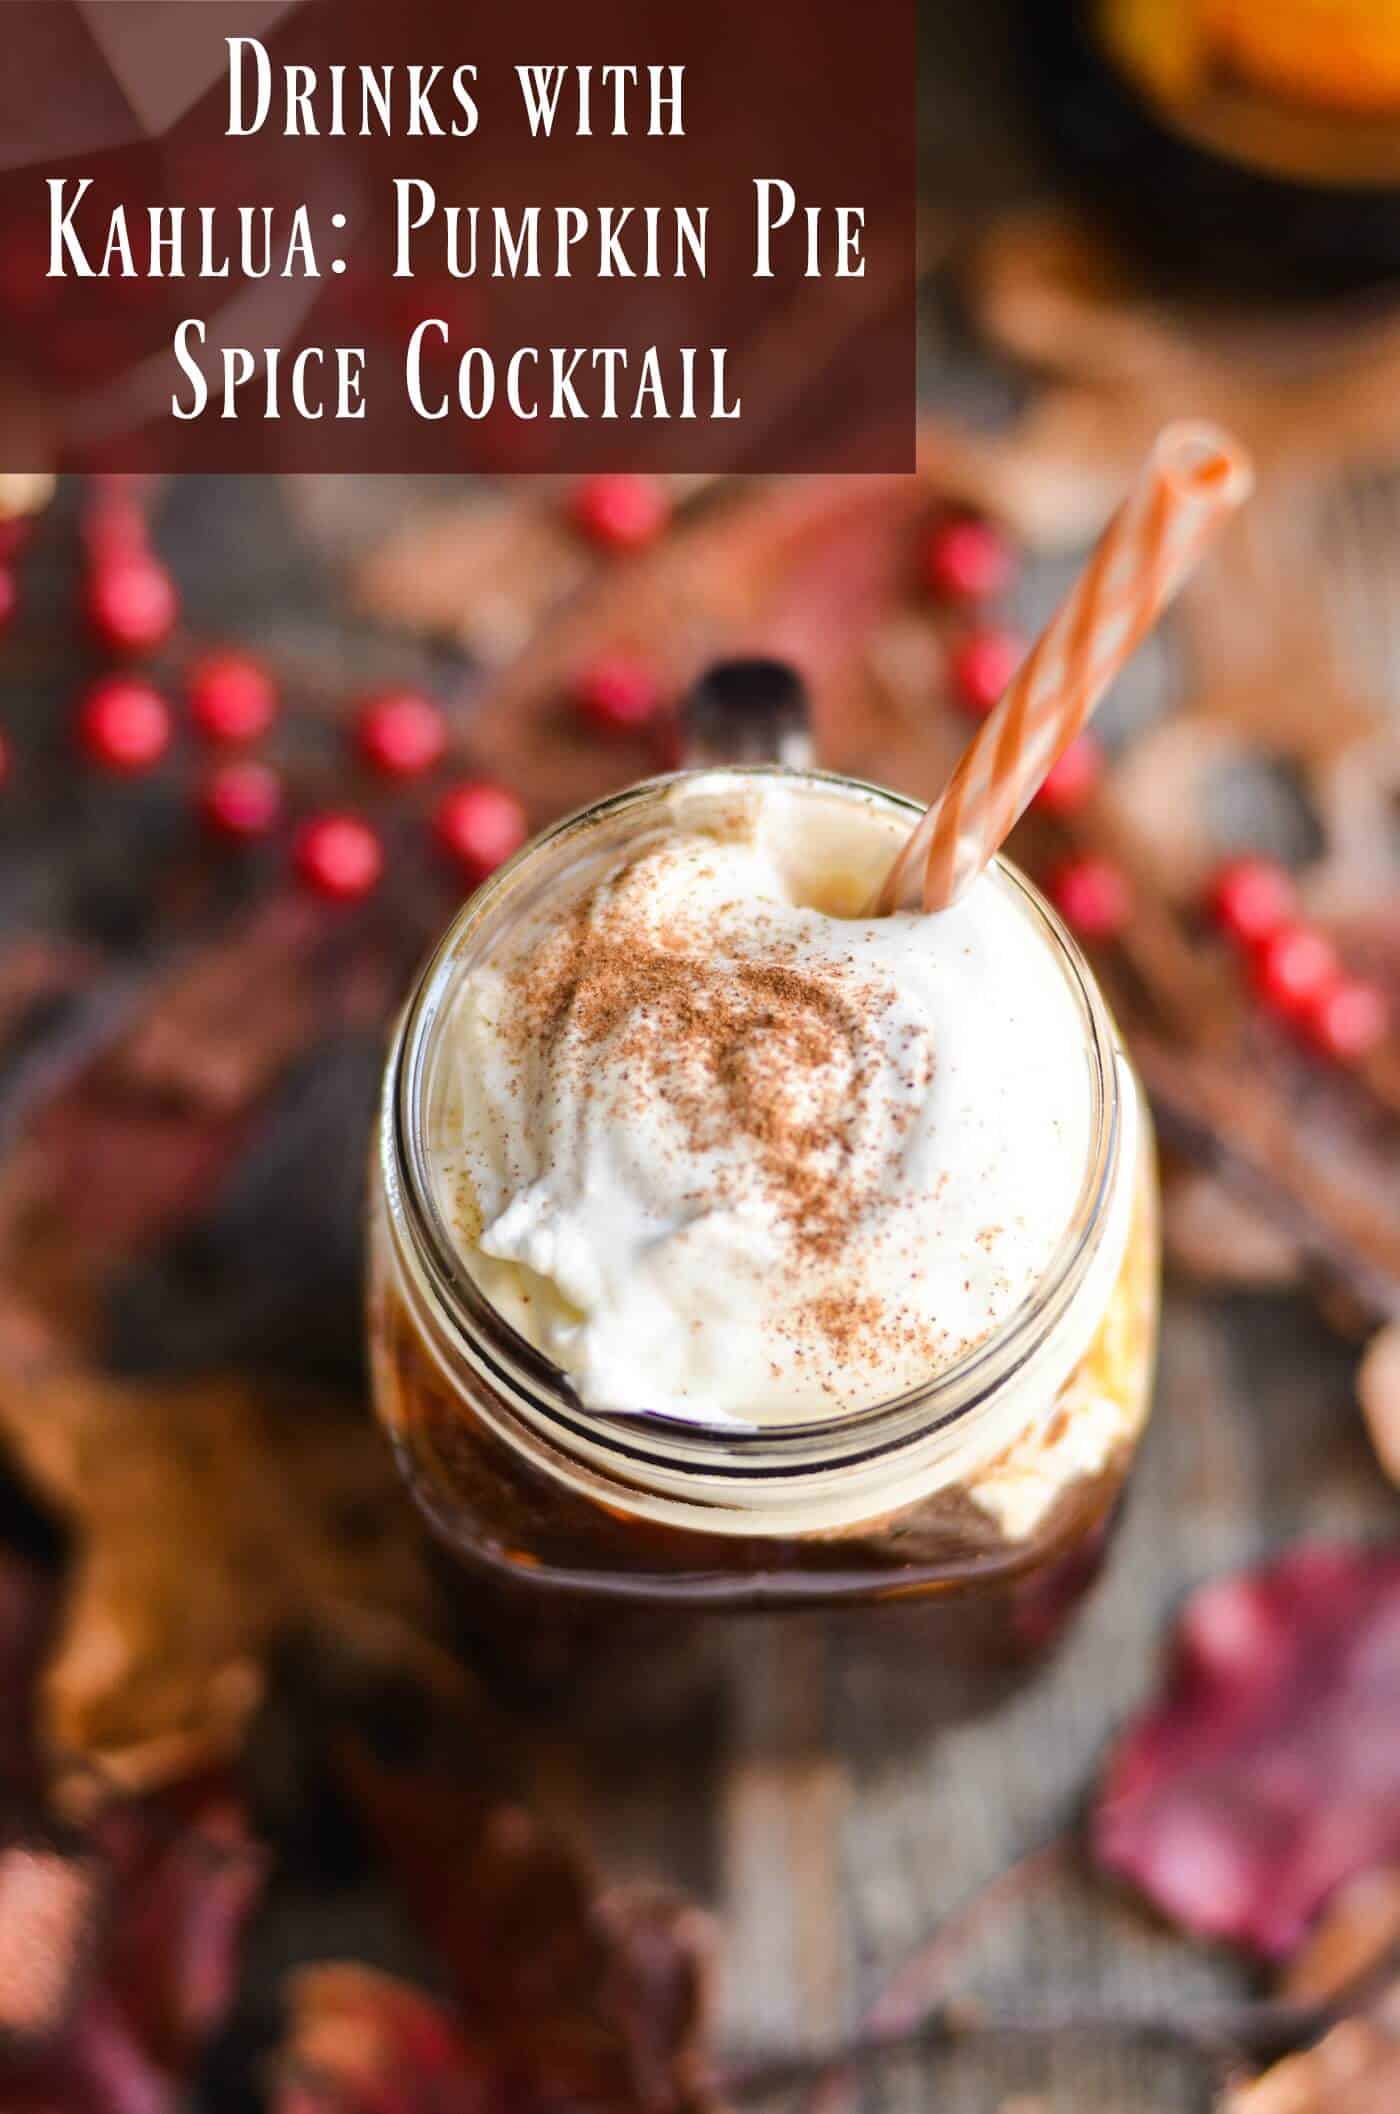 pumpkin cocktail recipe with vodka and kahlua